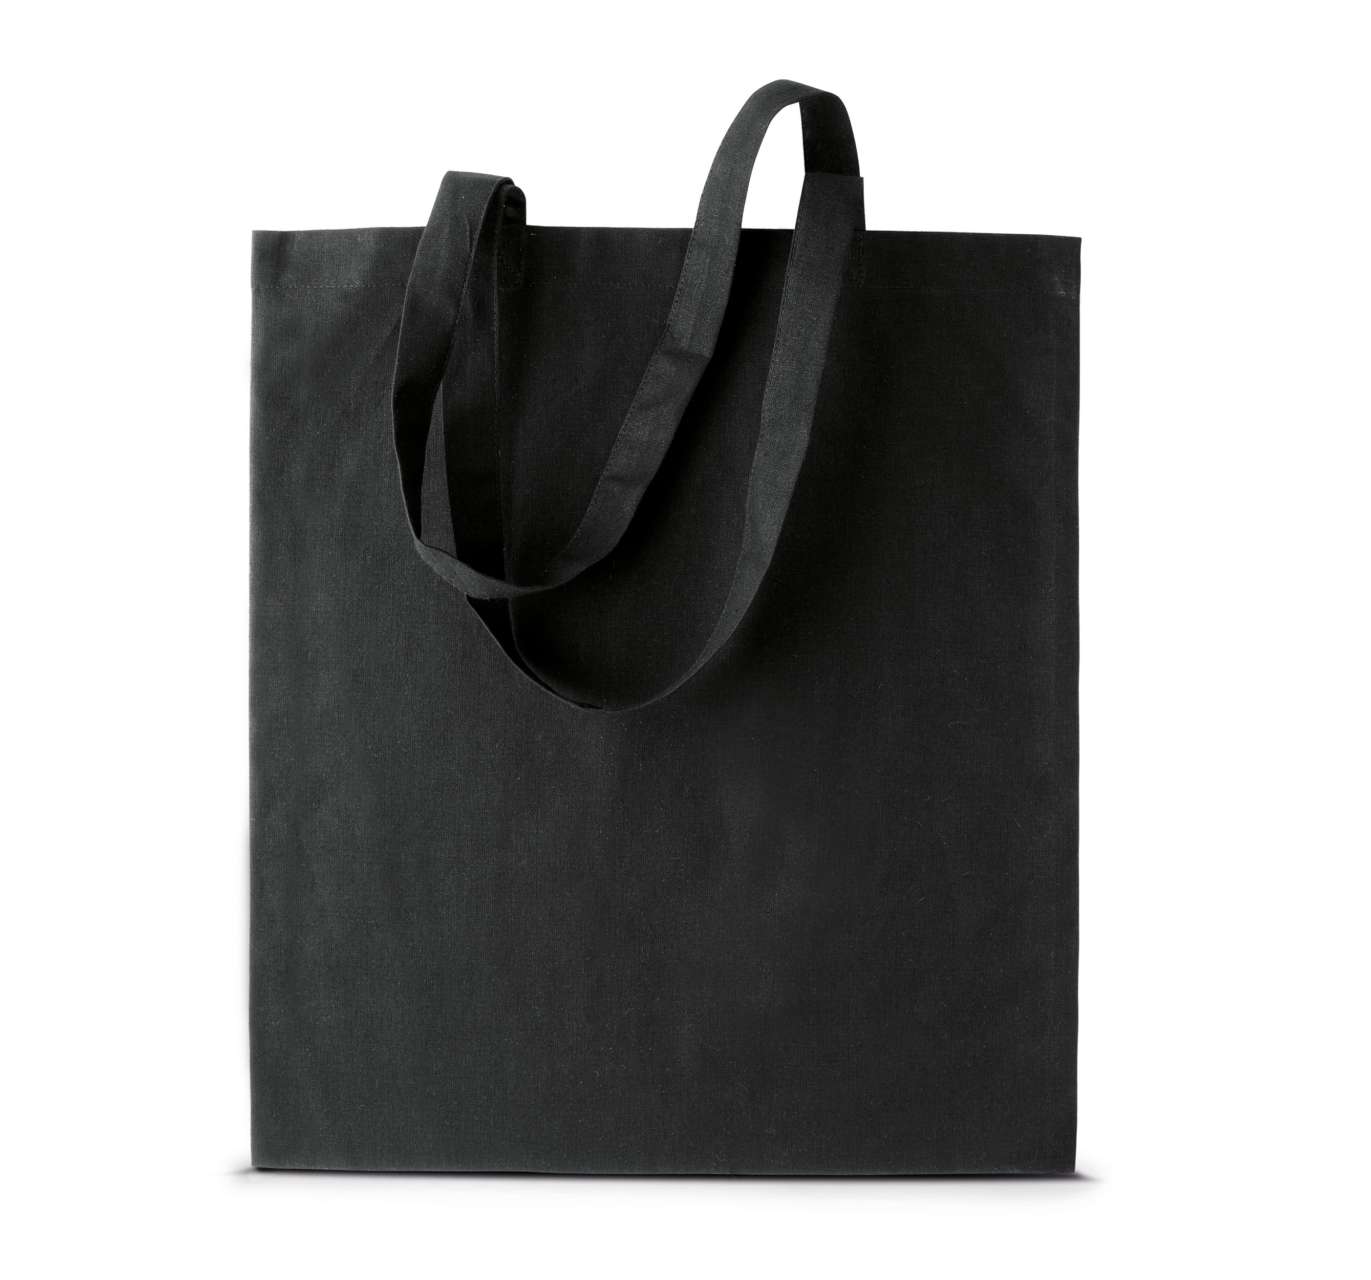 TOTE BAG WITH LONG HANDLE